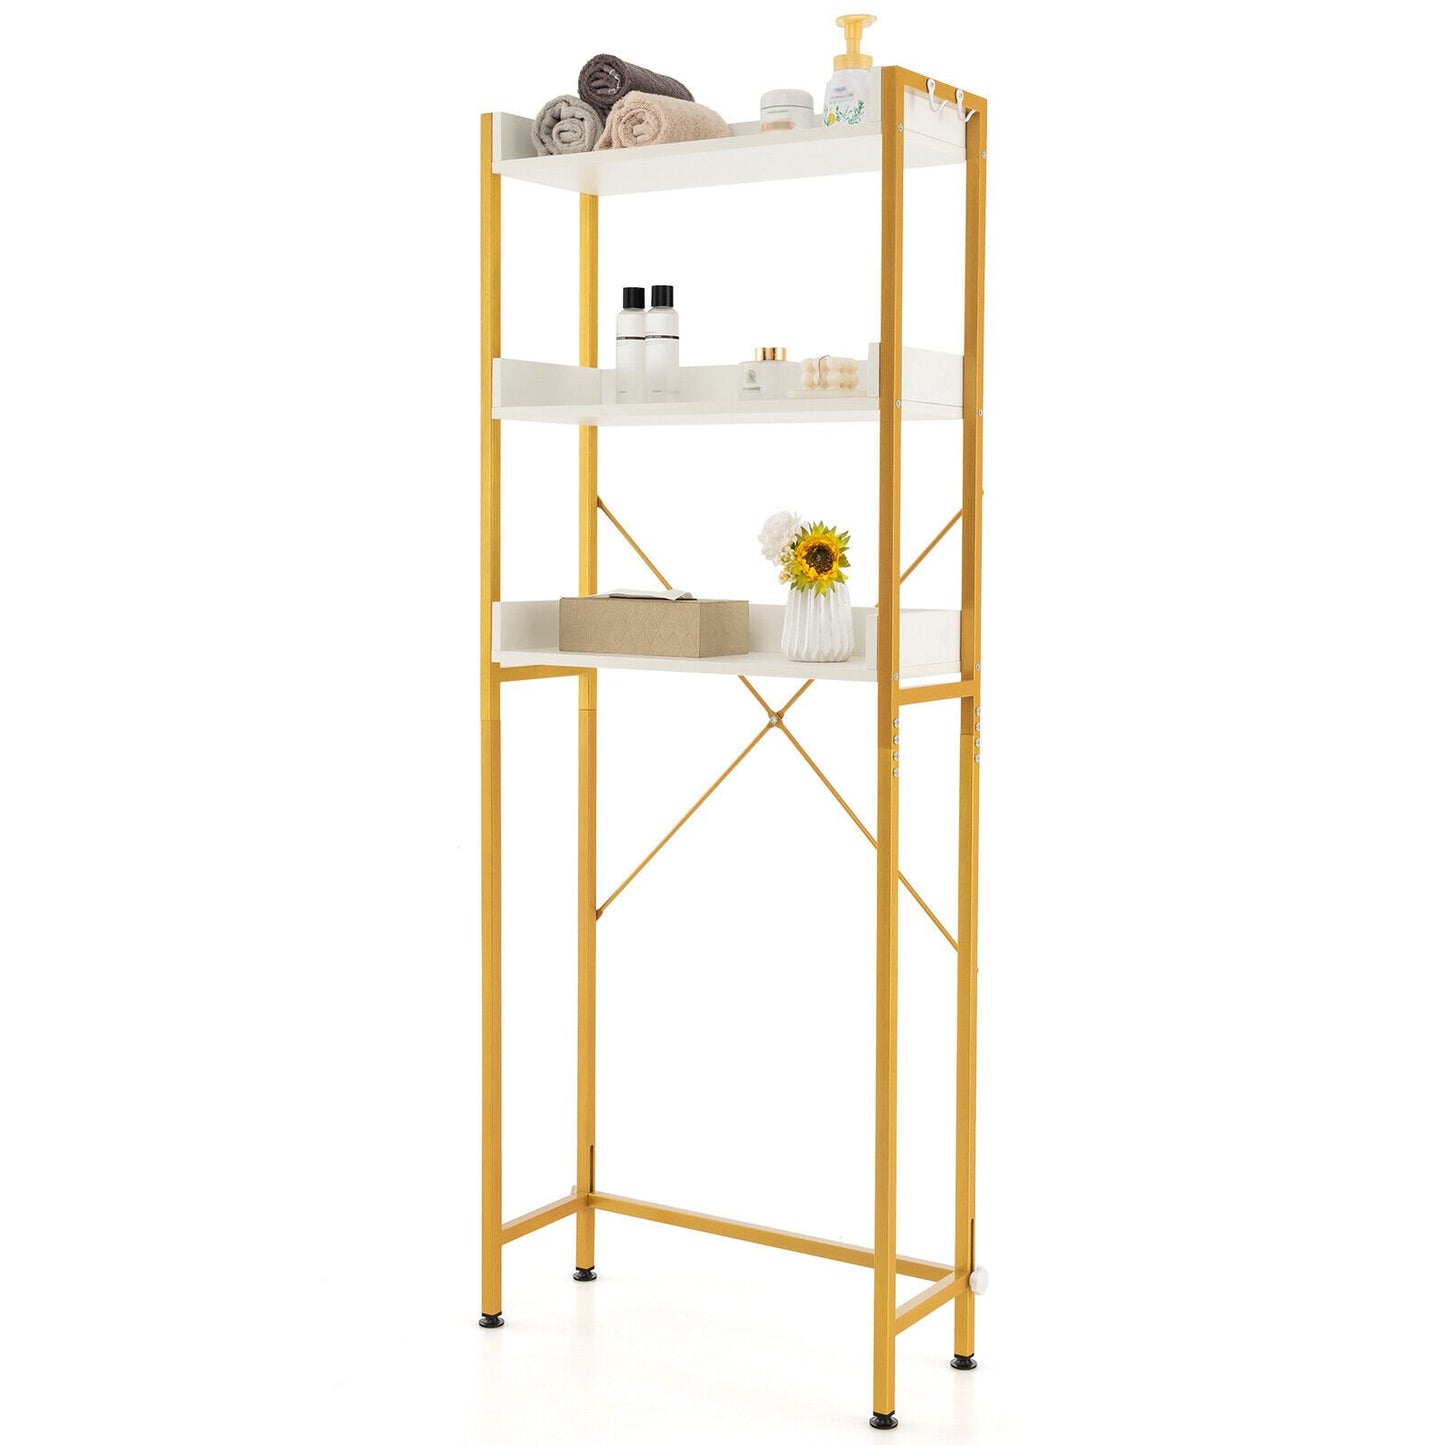 Over The Toilet Storage Rack with Hooks and Adjustable Bottom Bar, White